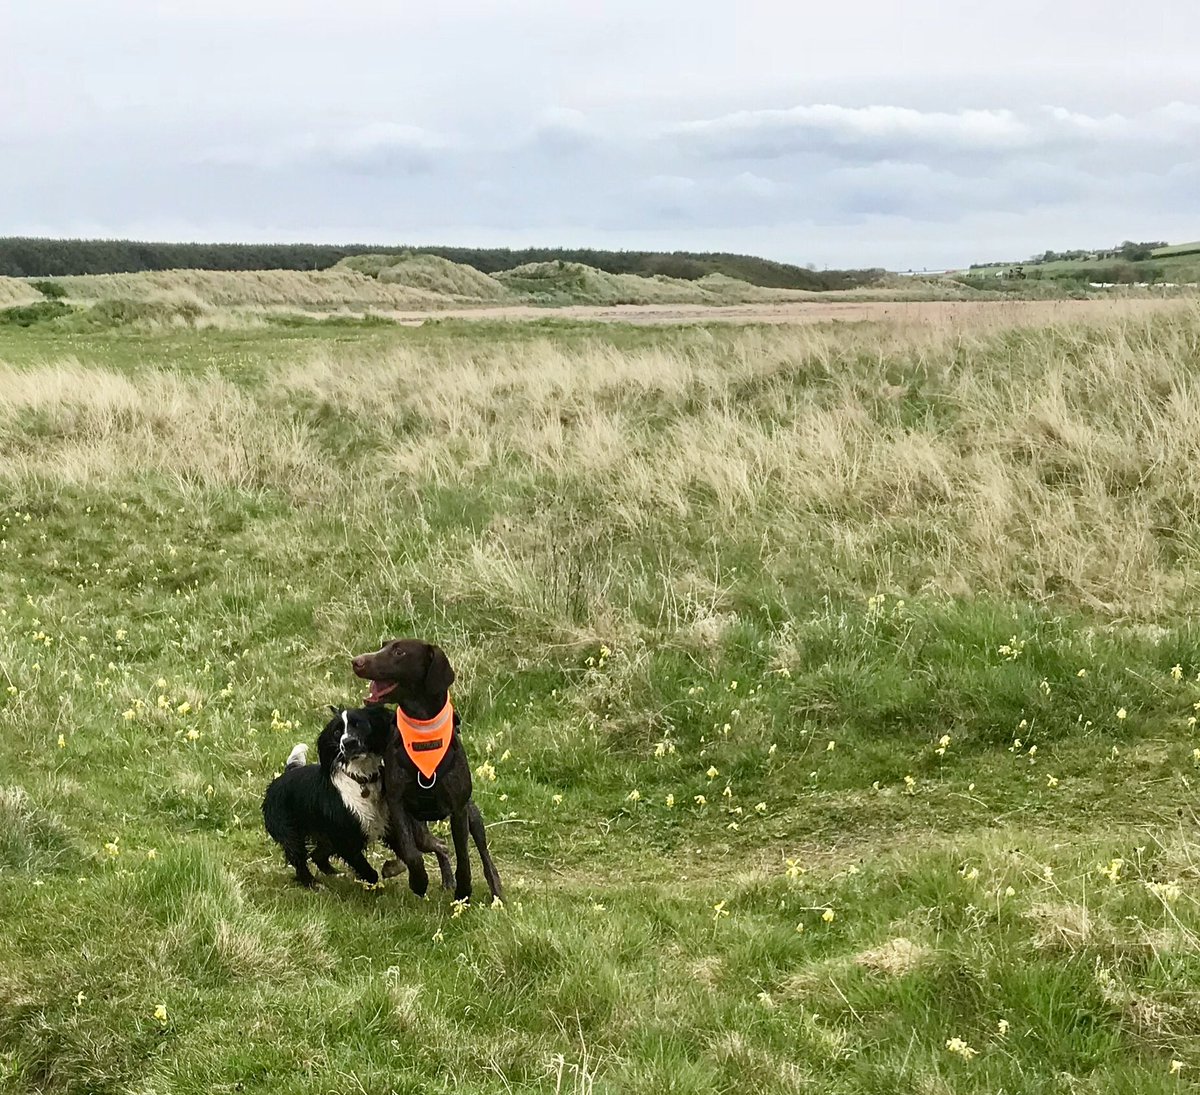 *flops into basket* Well that was fun! I was allowed offlead zoomies with a new furpal at the beach today, we ran and played for ages in the dunes 😃